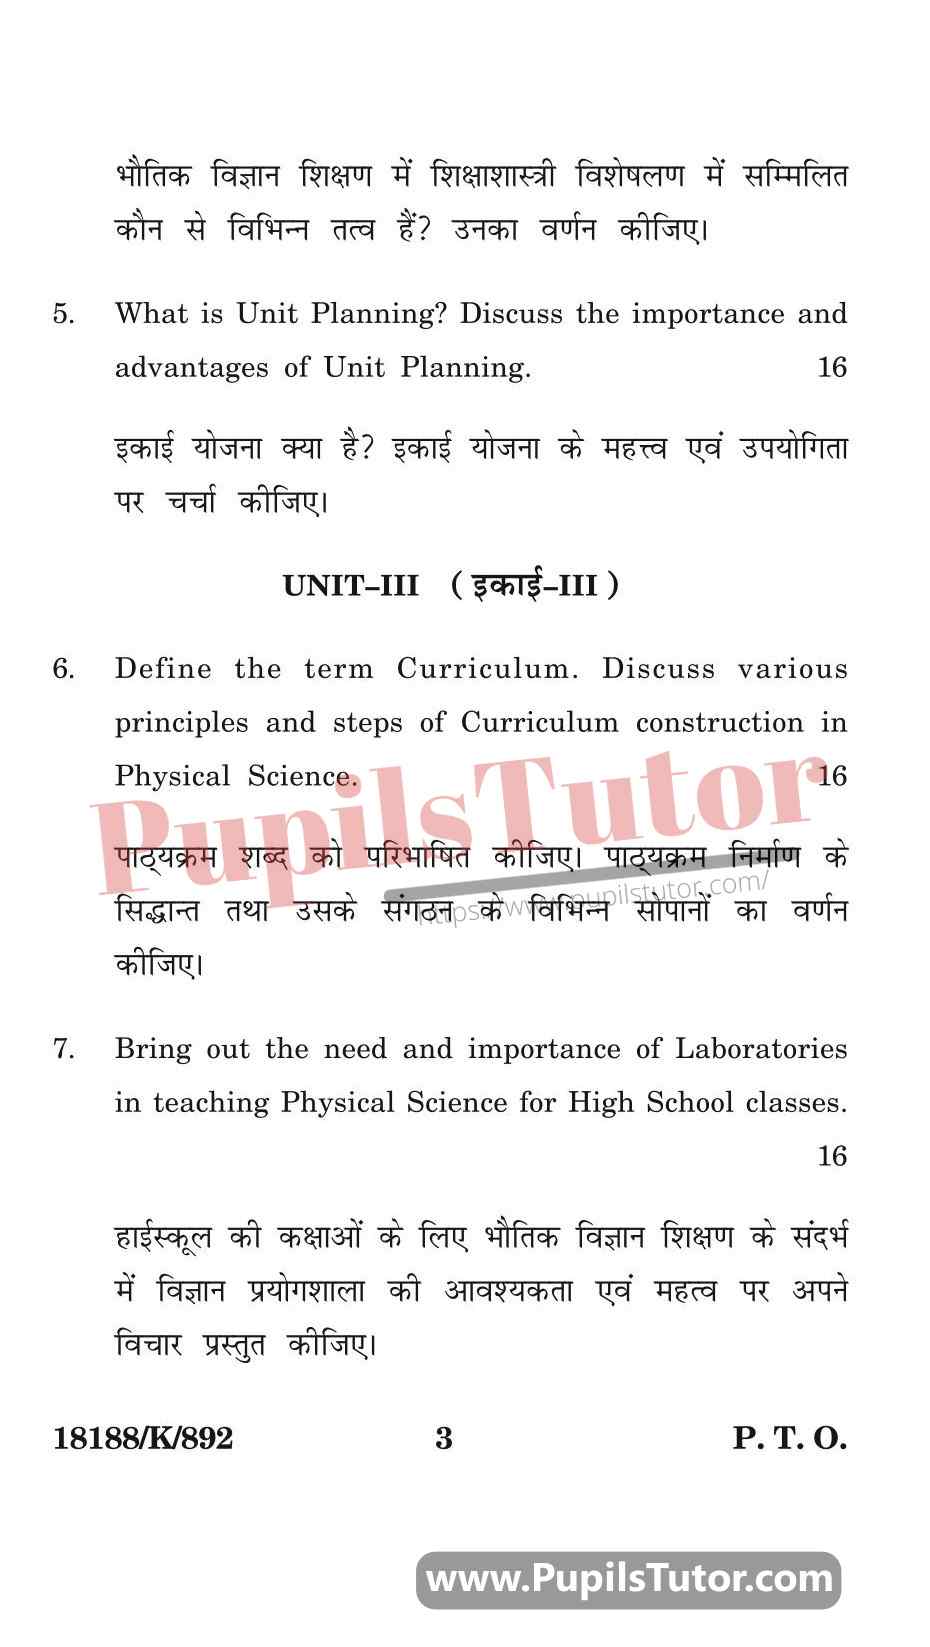 KUK (Kurukshetra University, Haryana) Pedagogy Of Physical Science Question Paper 2020 For B.Ed 1st And 2nd Year And All The 4 Semesters In English And Hindi Medium Free Download PDF - Page 3 - pupilstutor